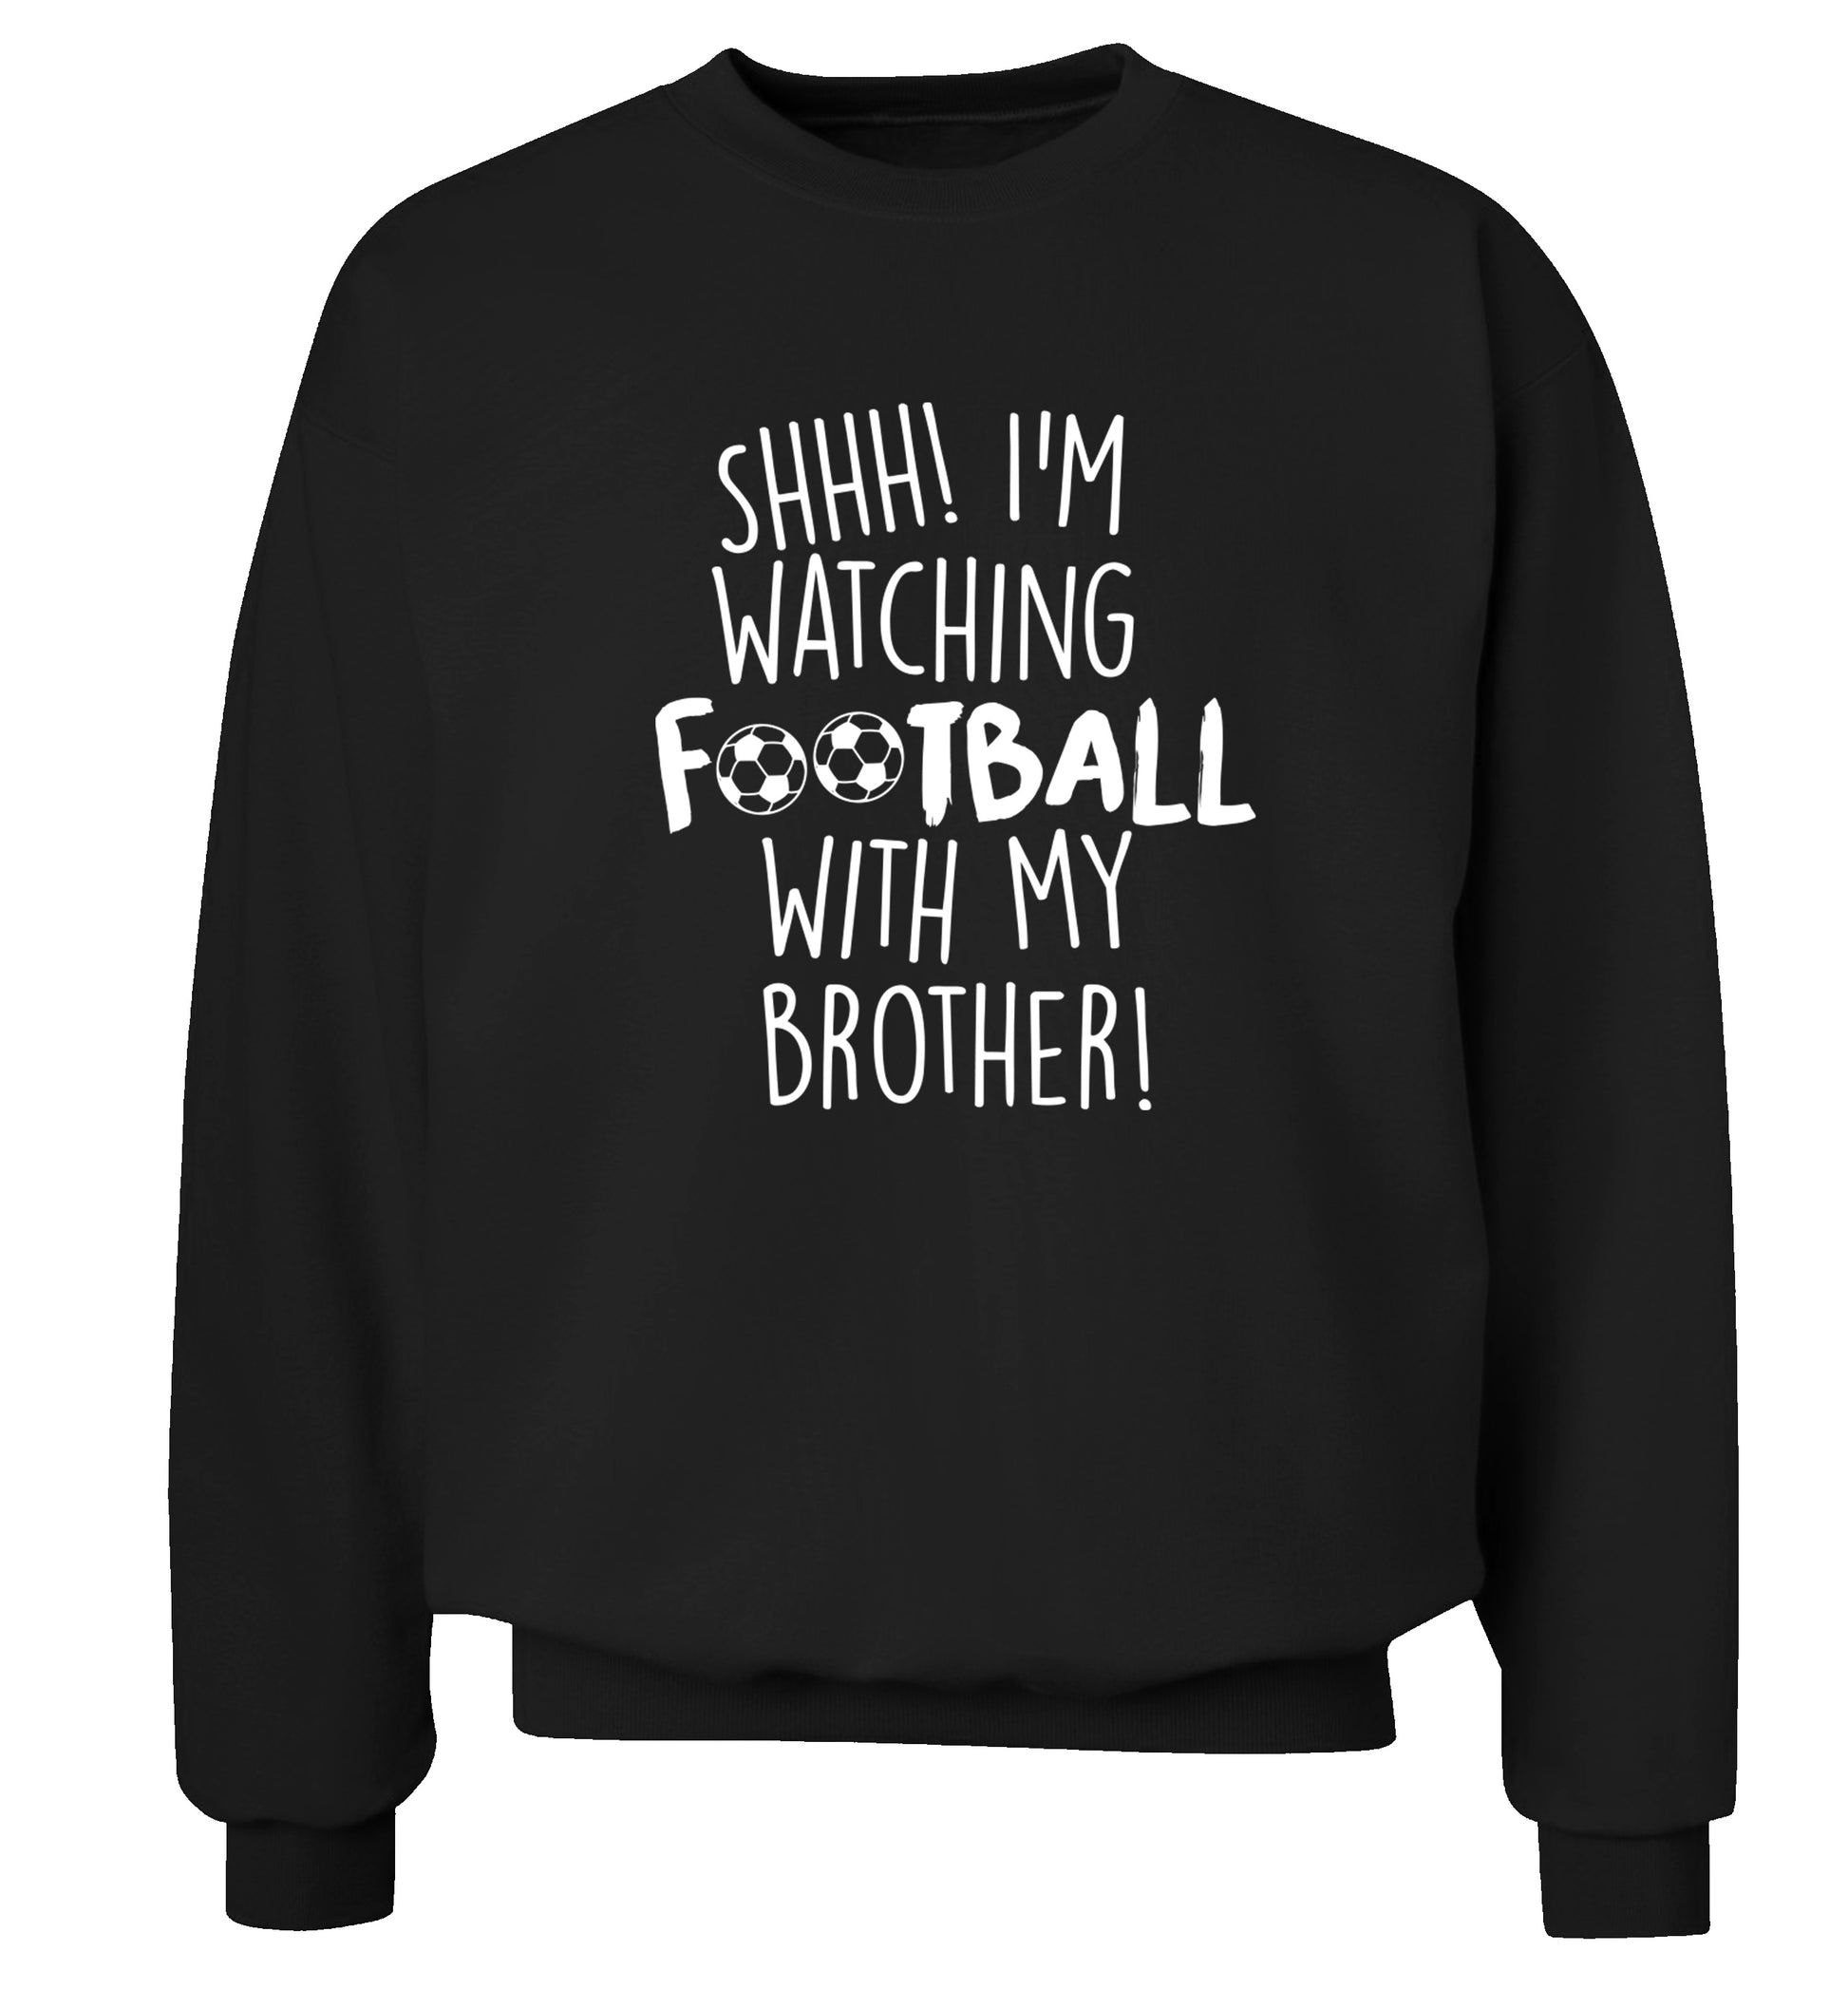 Shhh I'm watching football with my brother Adult's unisexblack Sweater 2XL